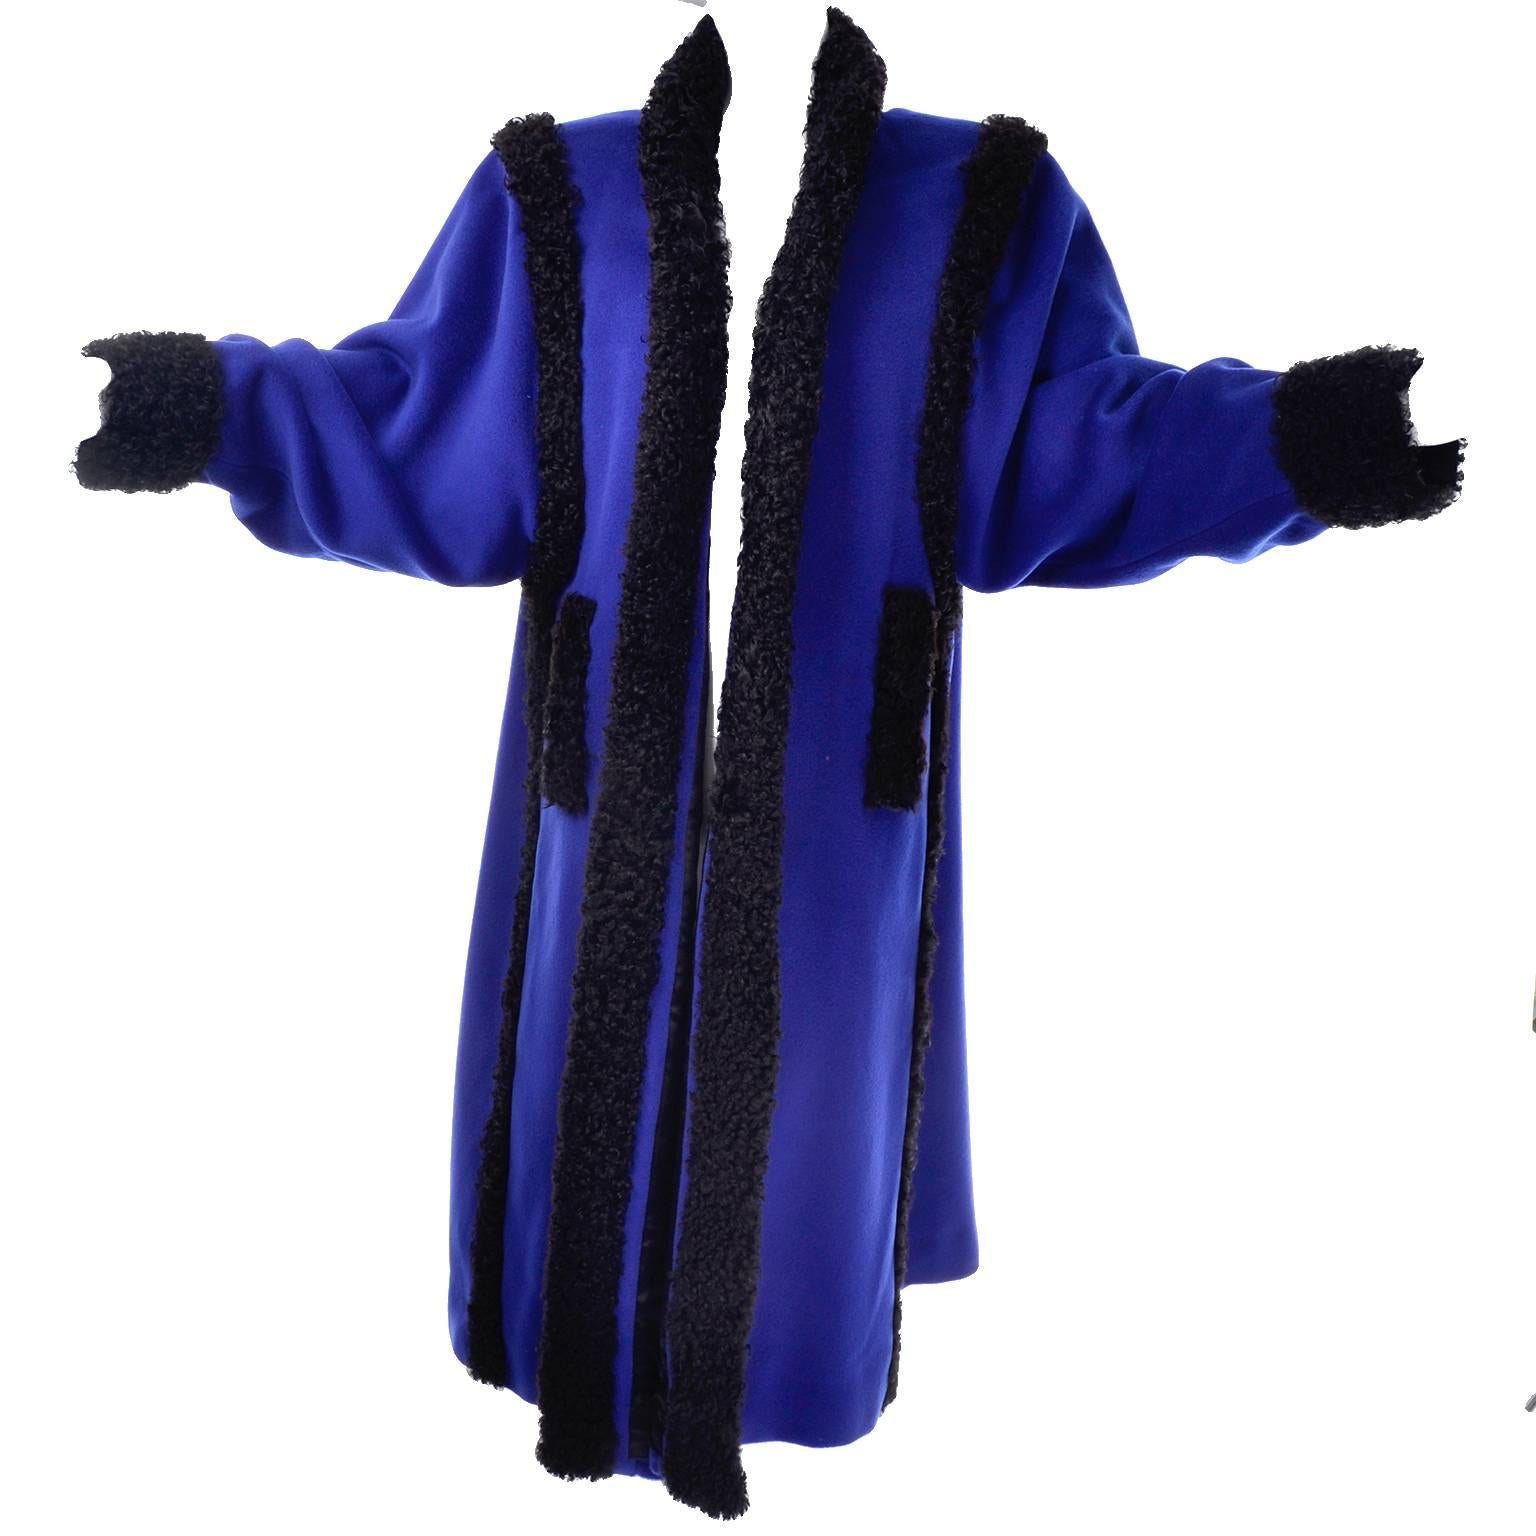 This is an outstanding vintage Yves Saint Laurent Rive Gauche long coat made of blue wool with curly black wool trim. This sensational, collectible coat is fully lined and has two pockets. Marked as size 38, and made in Paris, France, this coat has